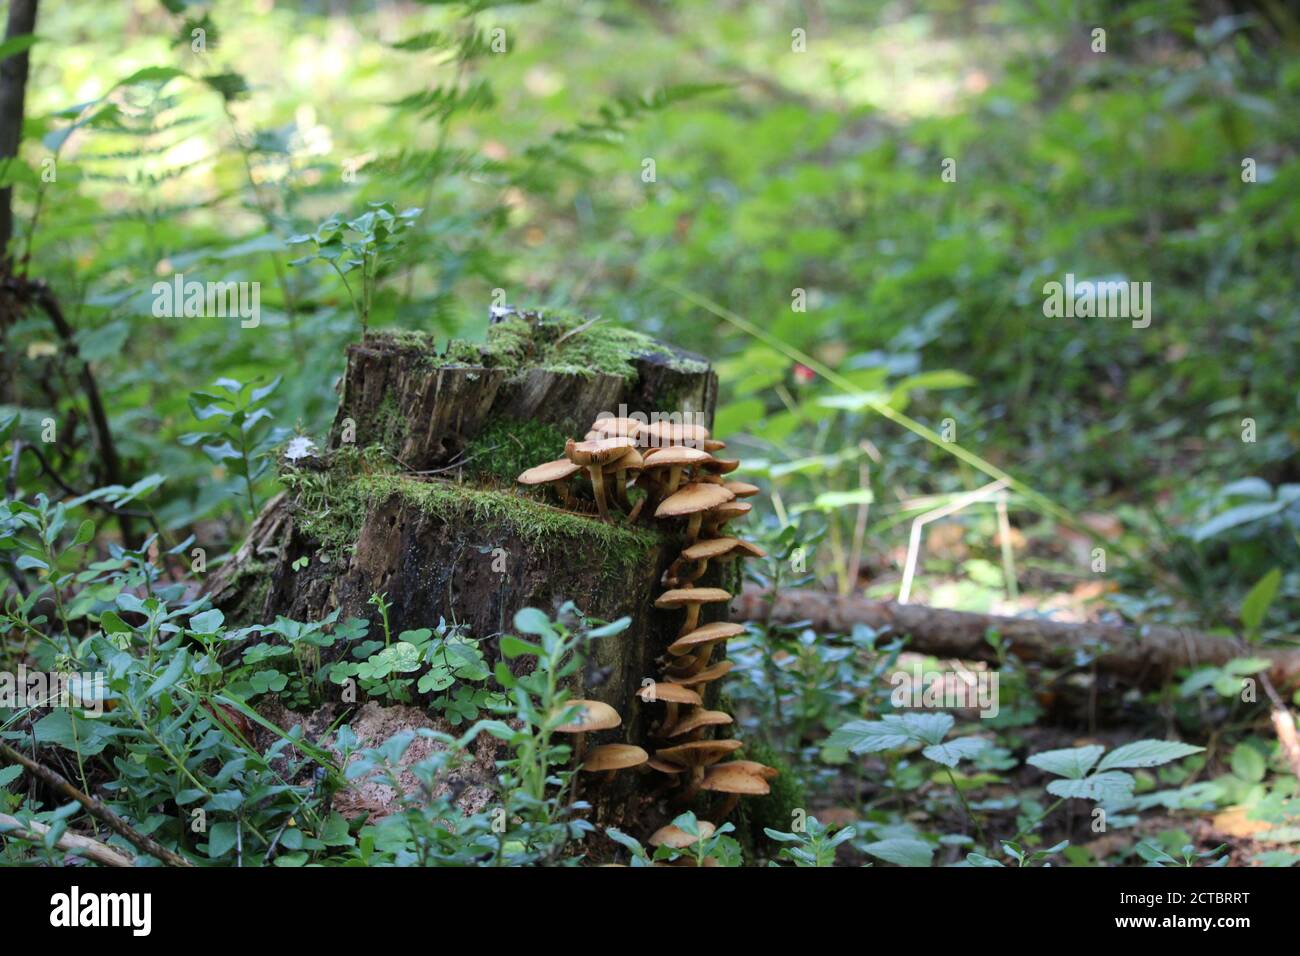 honey mushrooms growing on a stump in the forest Stock Photo